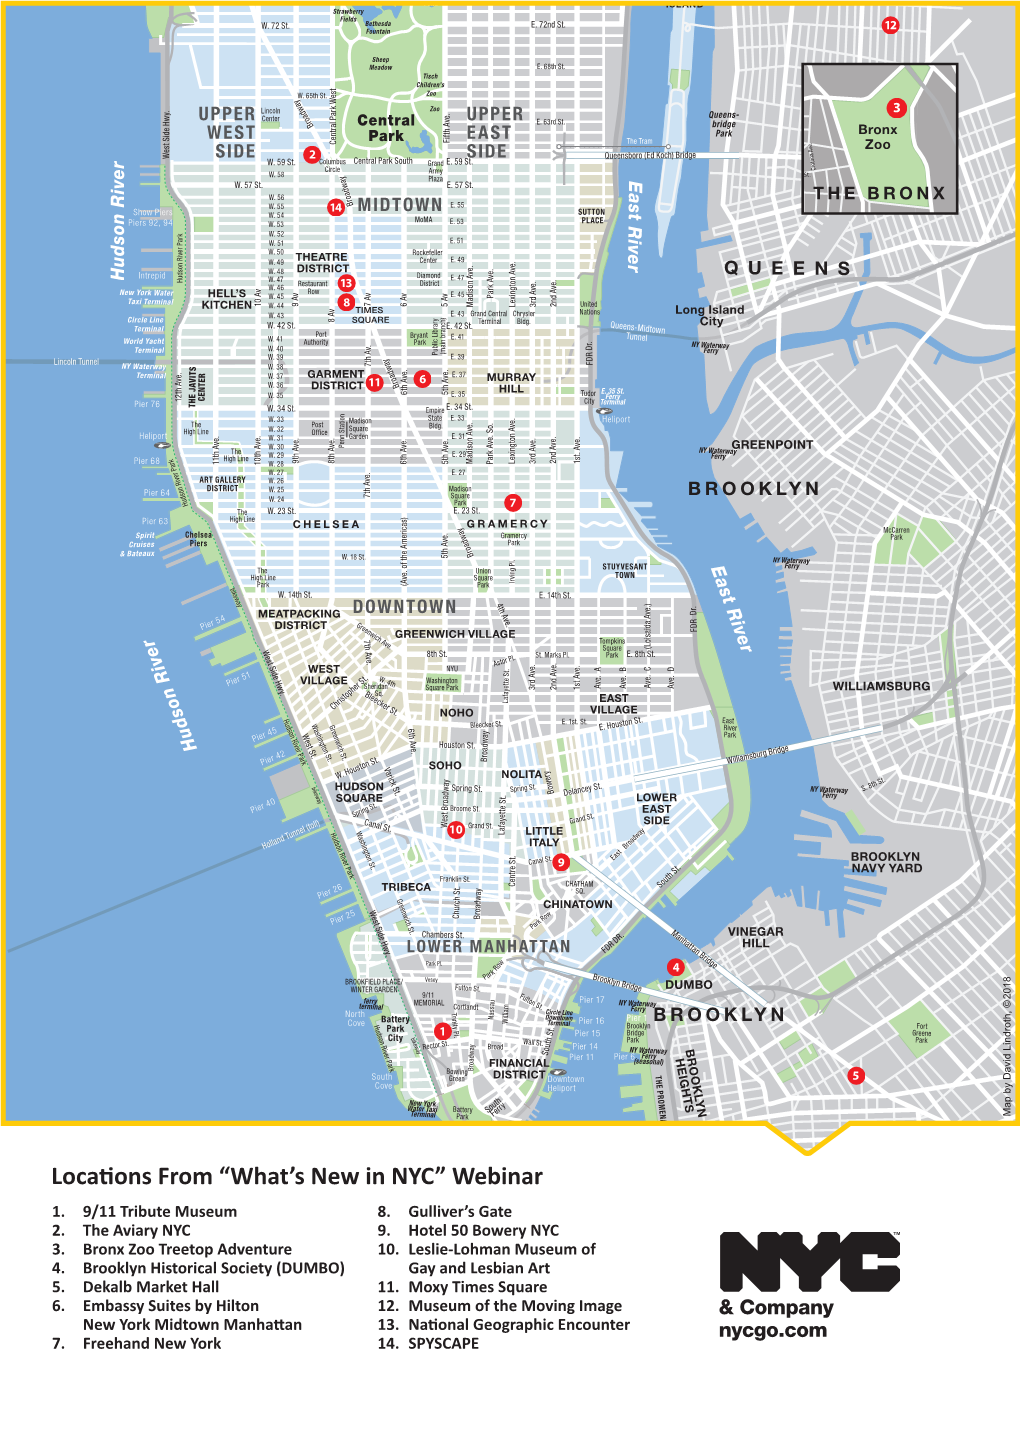 Locations from “What's New in NYC” Webinar